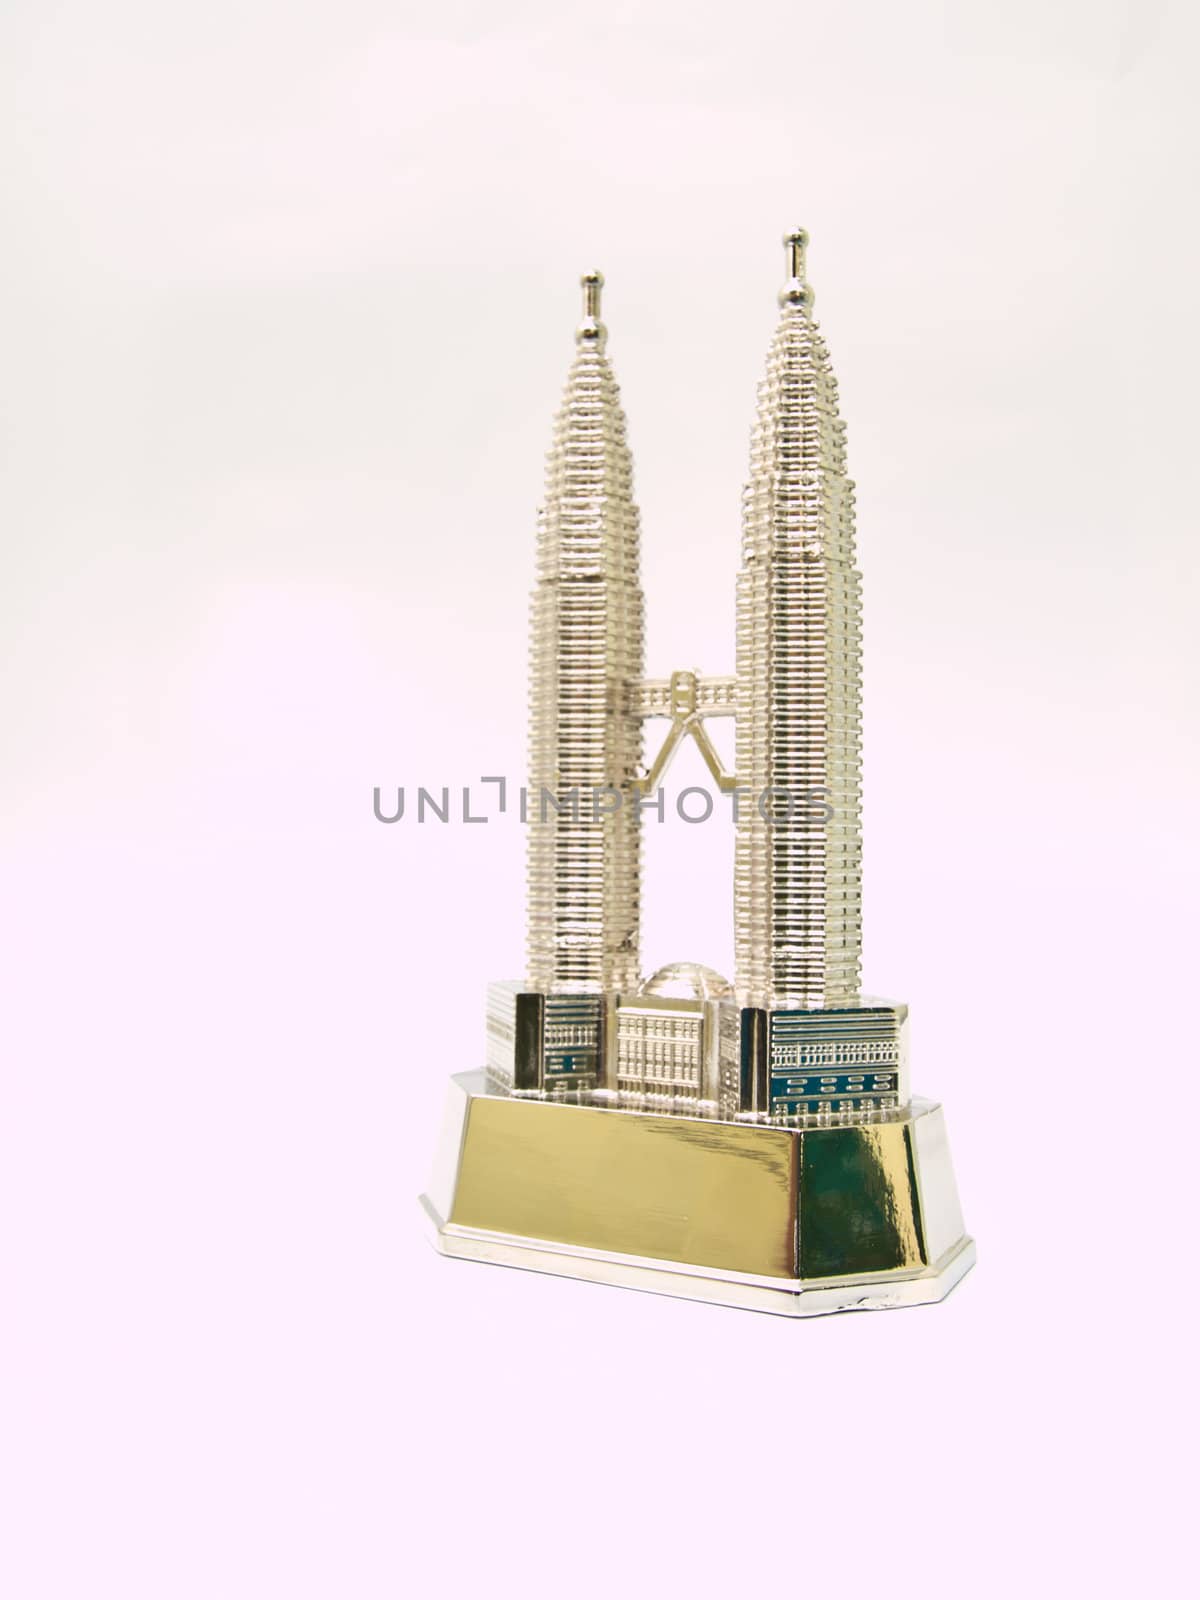 Petronas towers is the landmark of Kuala Lumpur, Malaysia. designed by designed by Argentinian architect César Pelli.